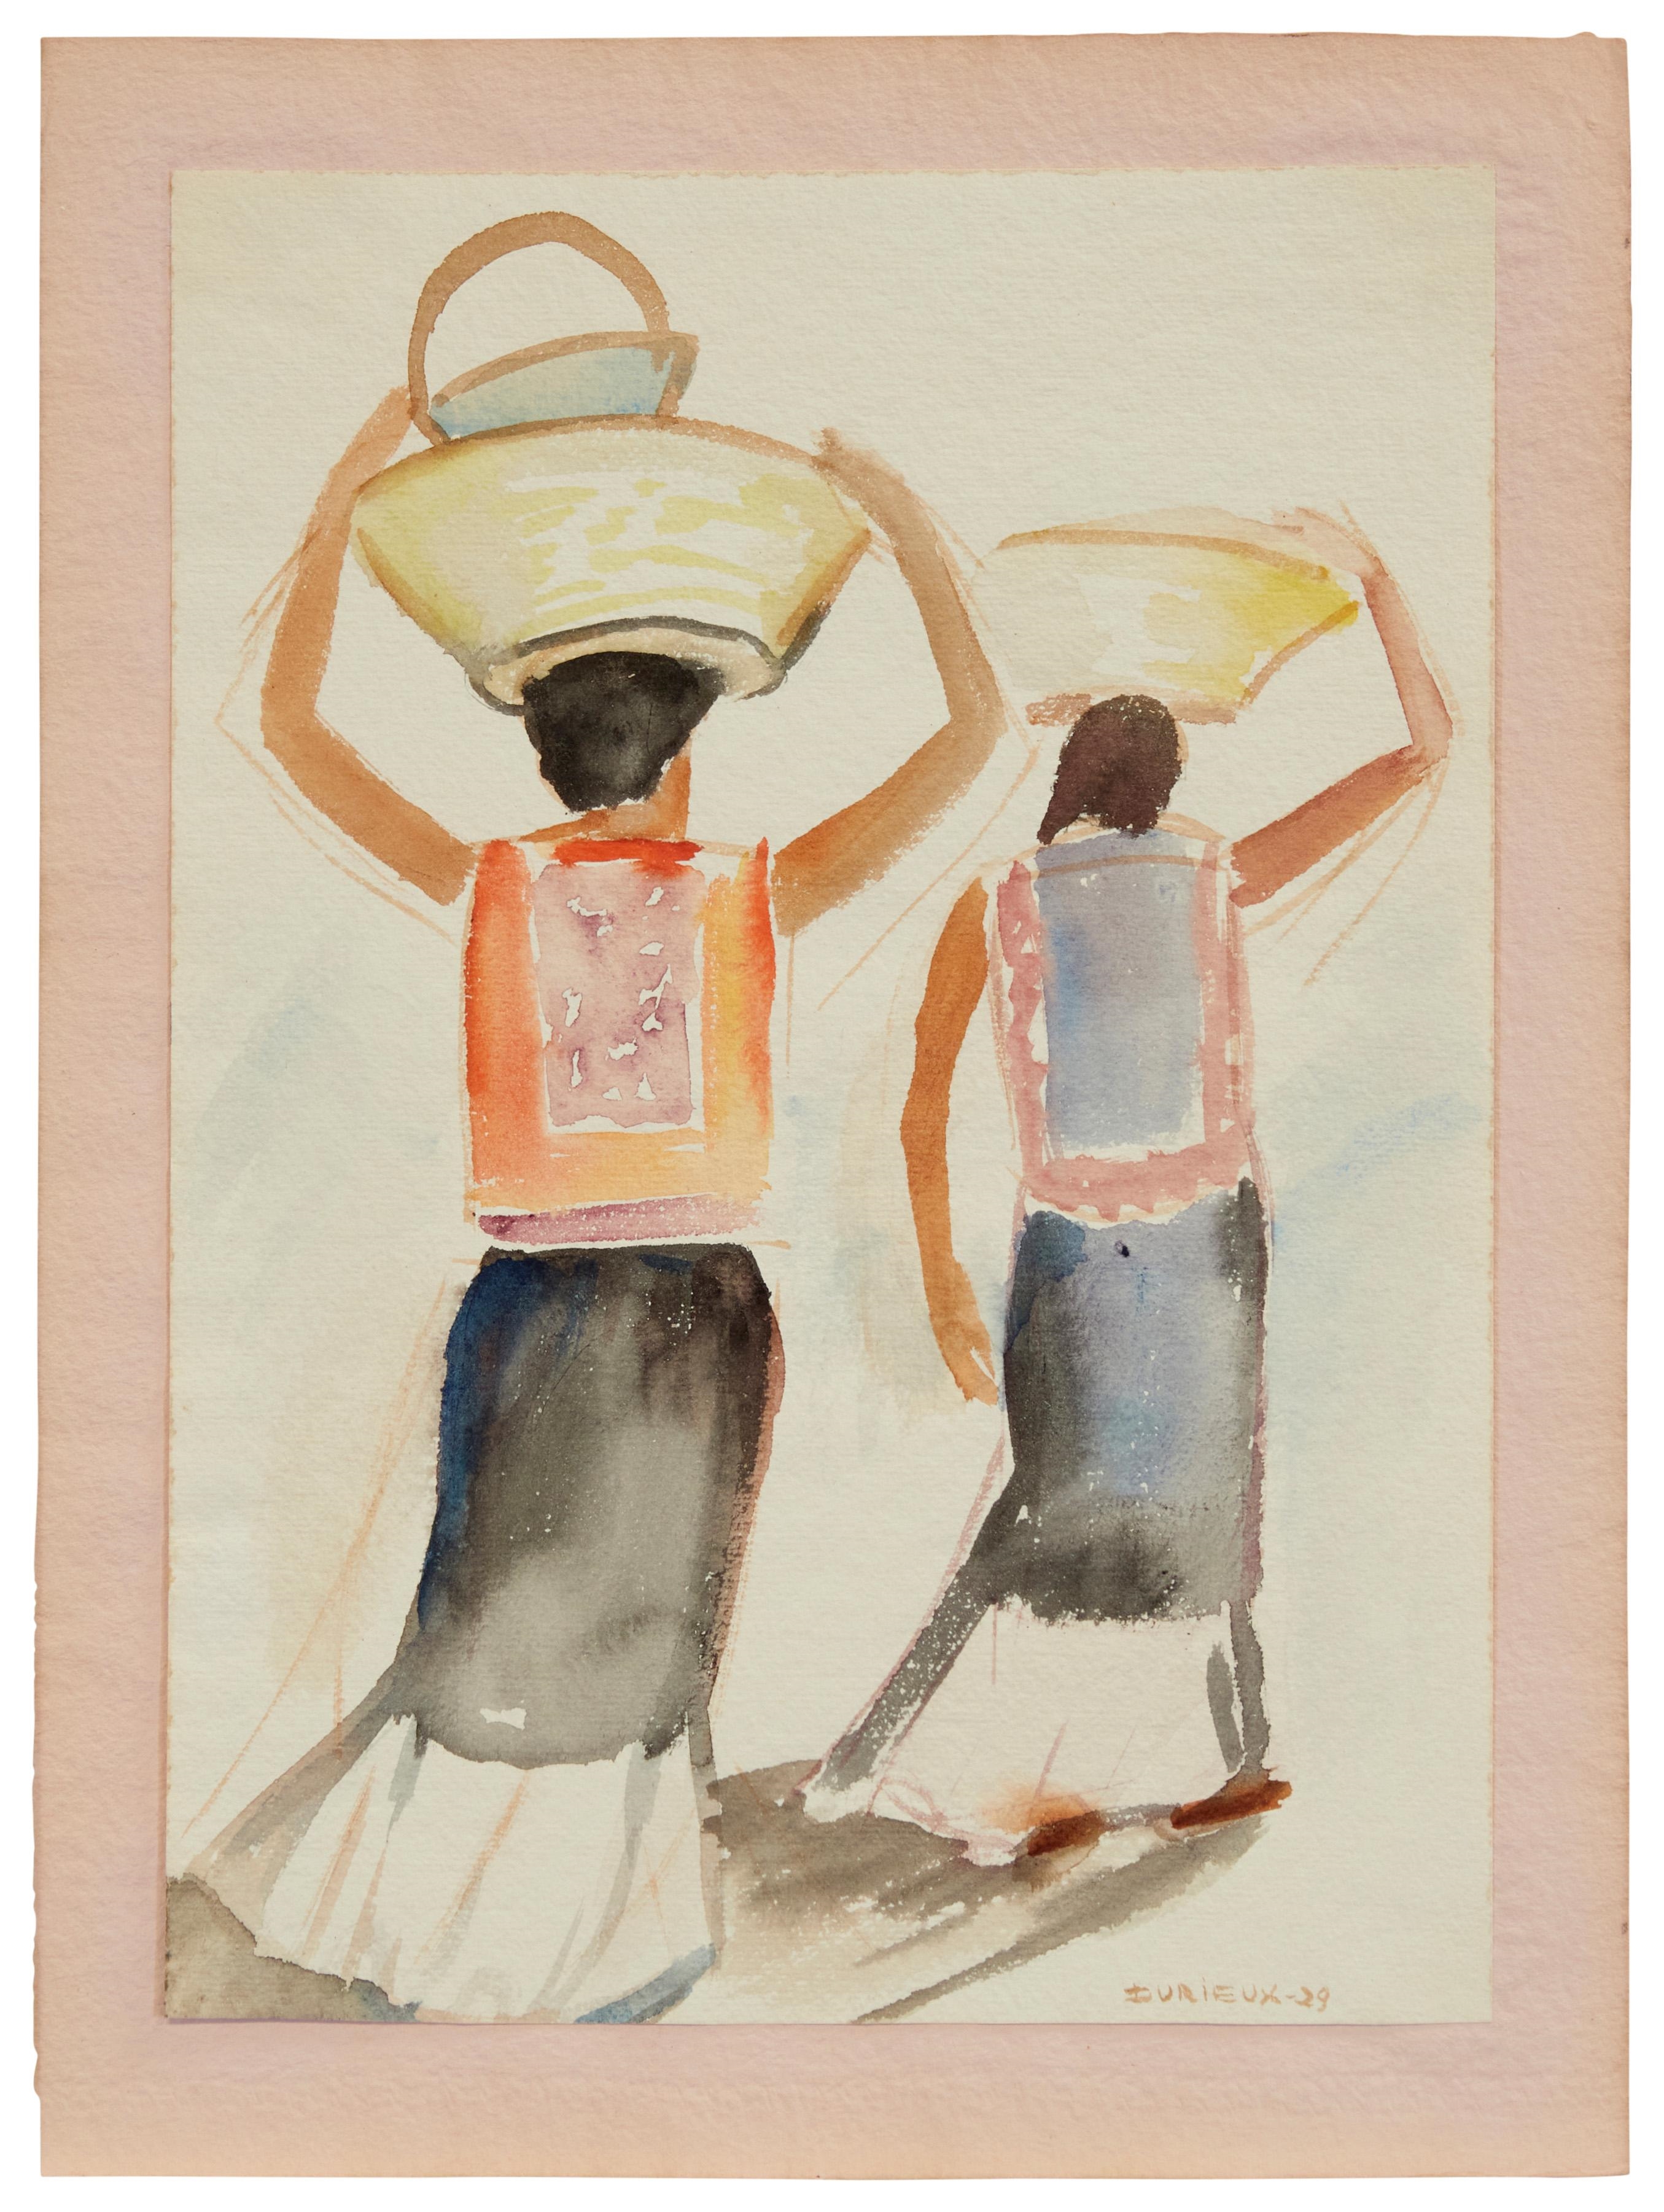 Untitled, two figures - Caroline Durieux